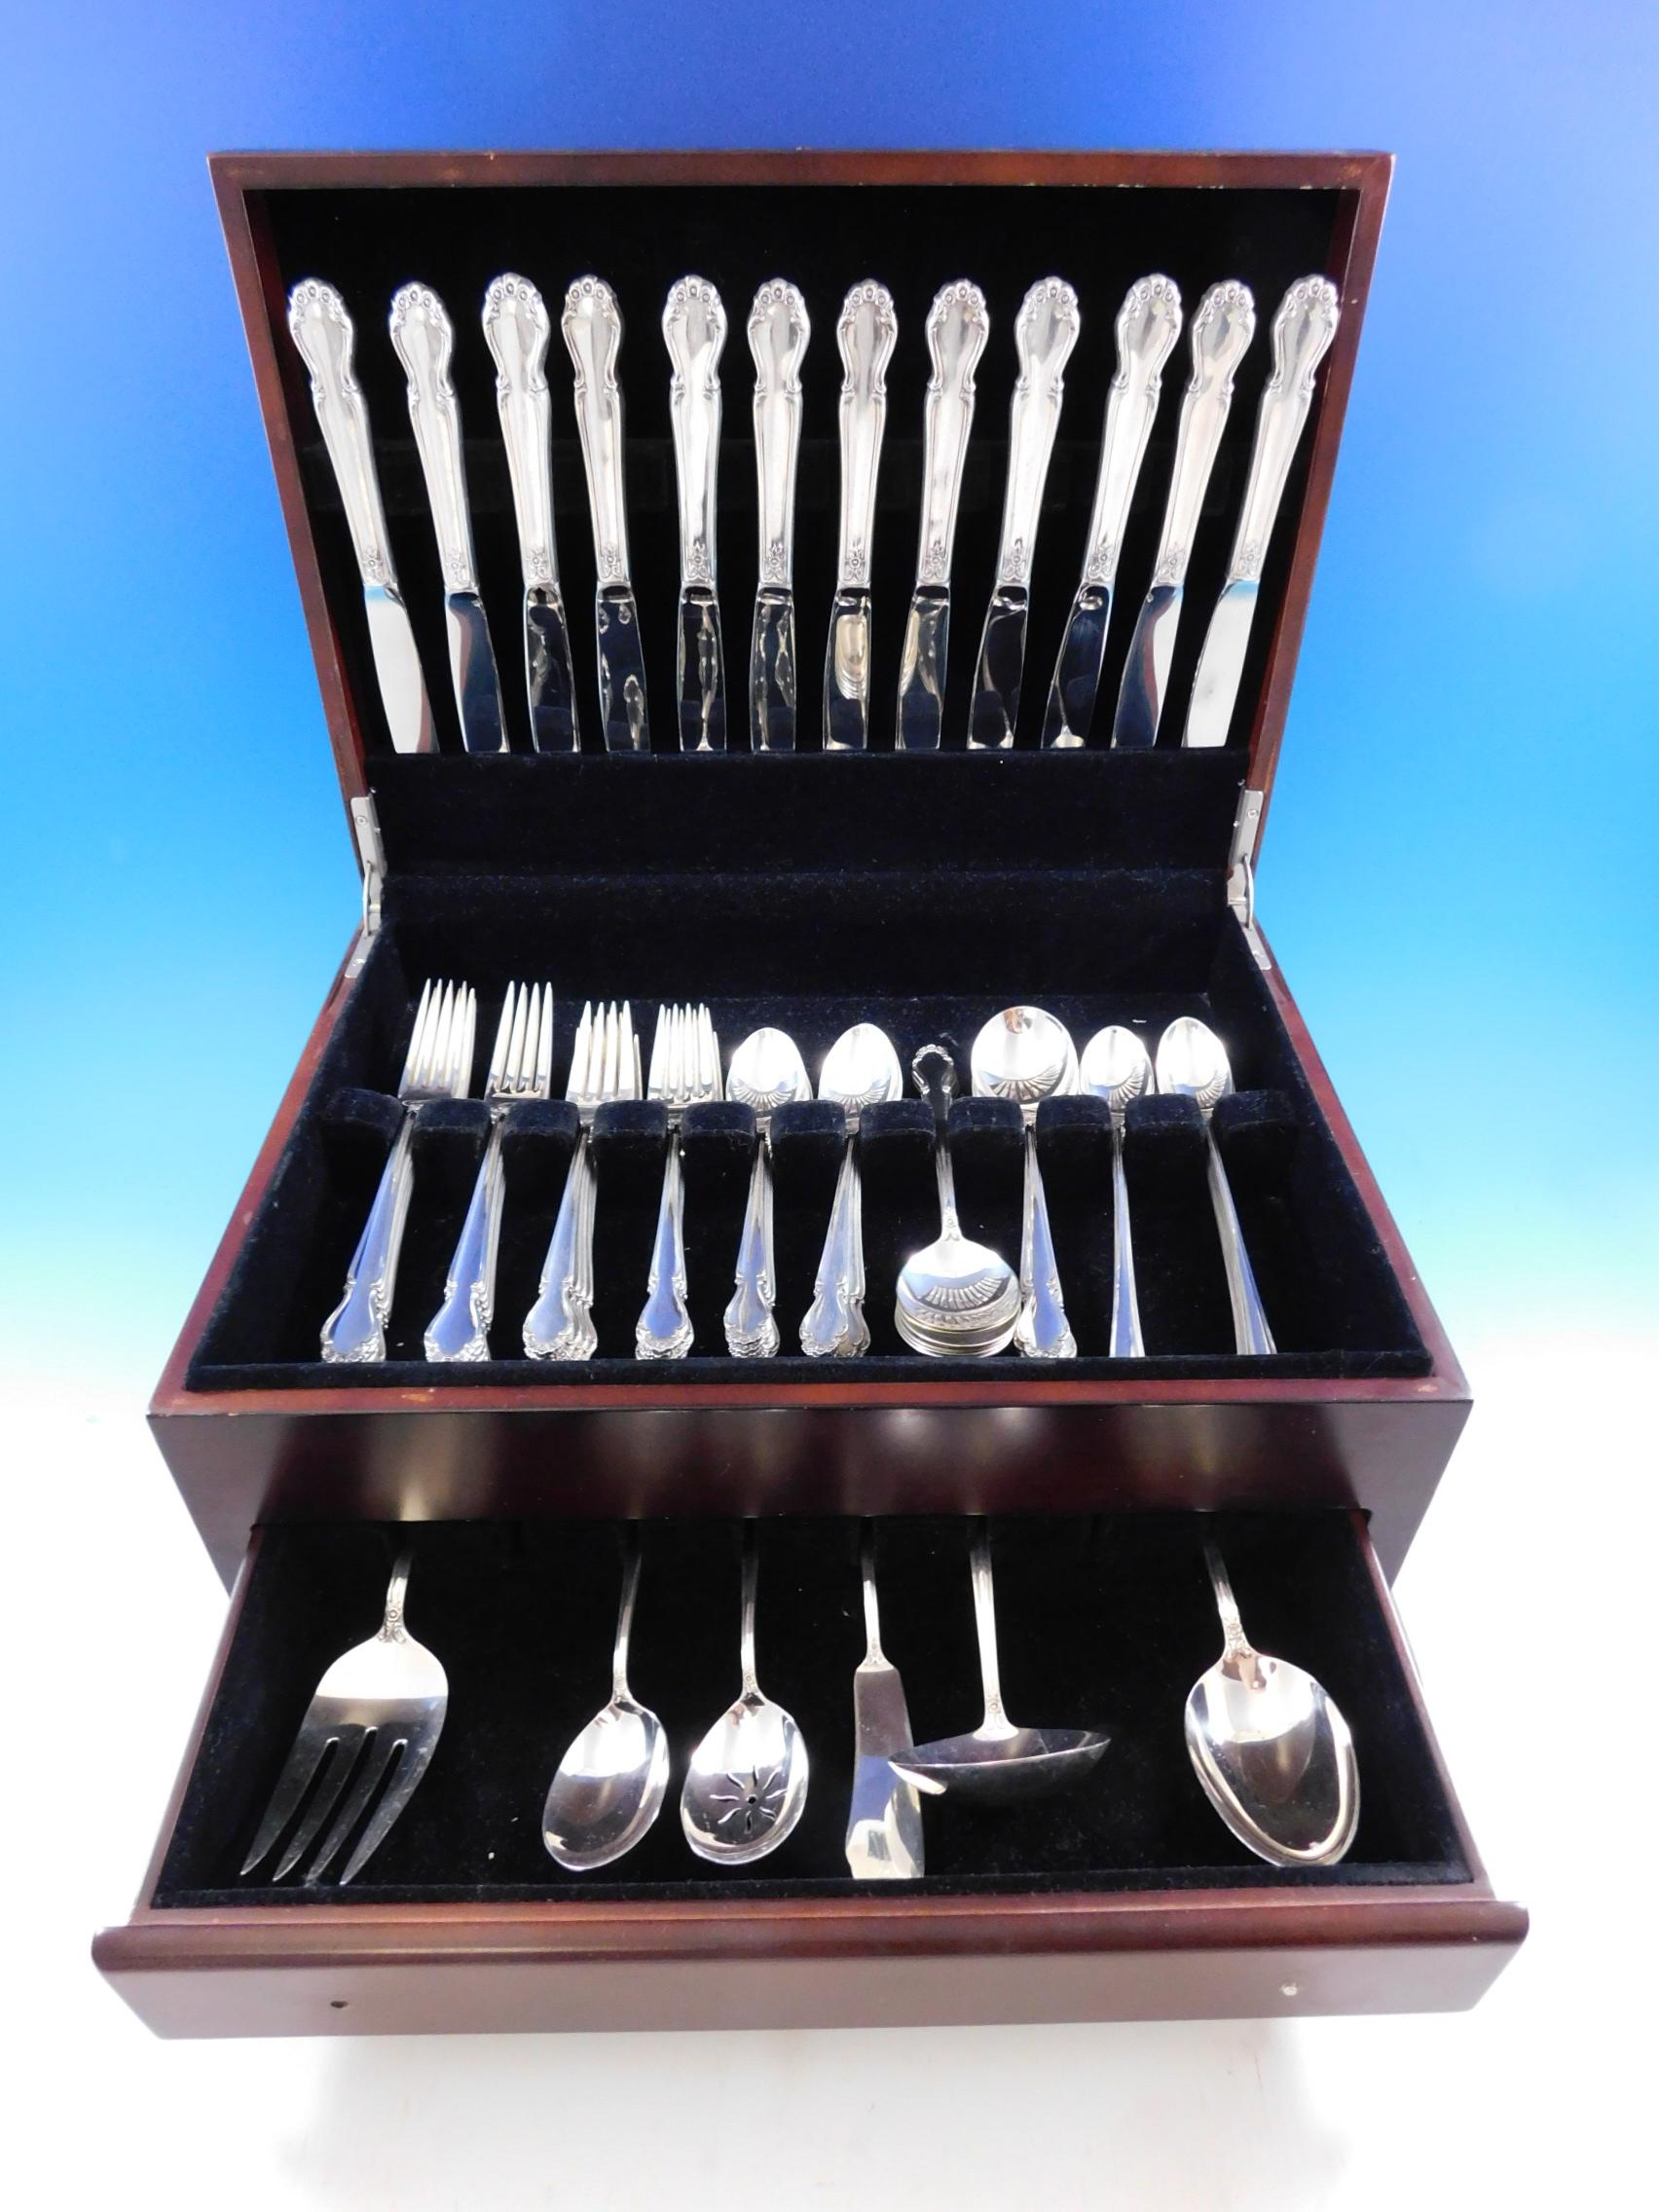 Wedding Bells by International sterling silver flatware set, 78 pieces. This set includes:

12 knives, 9